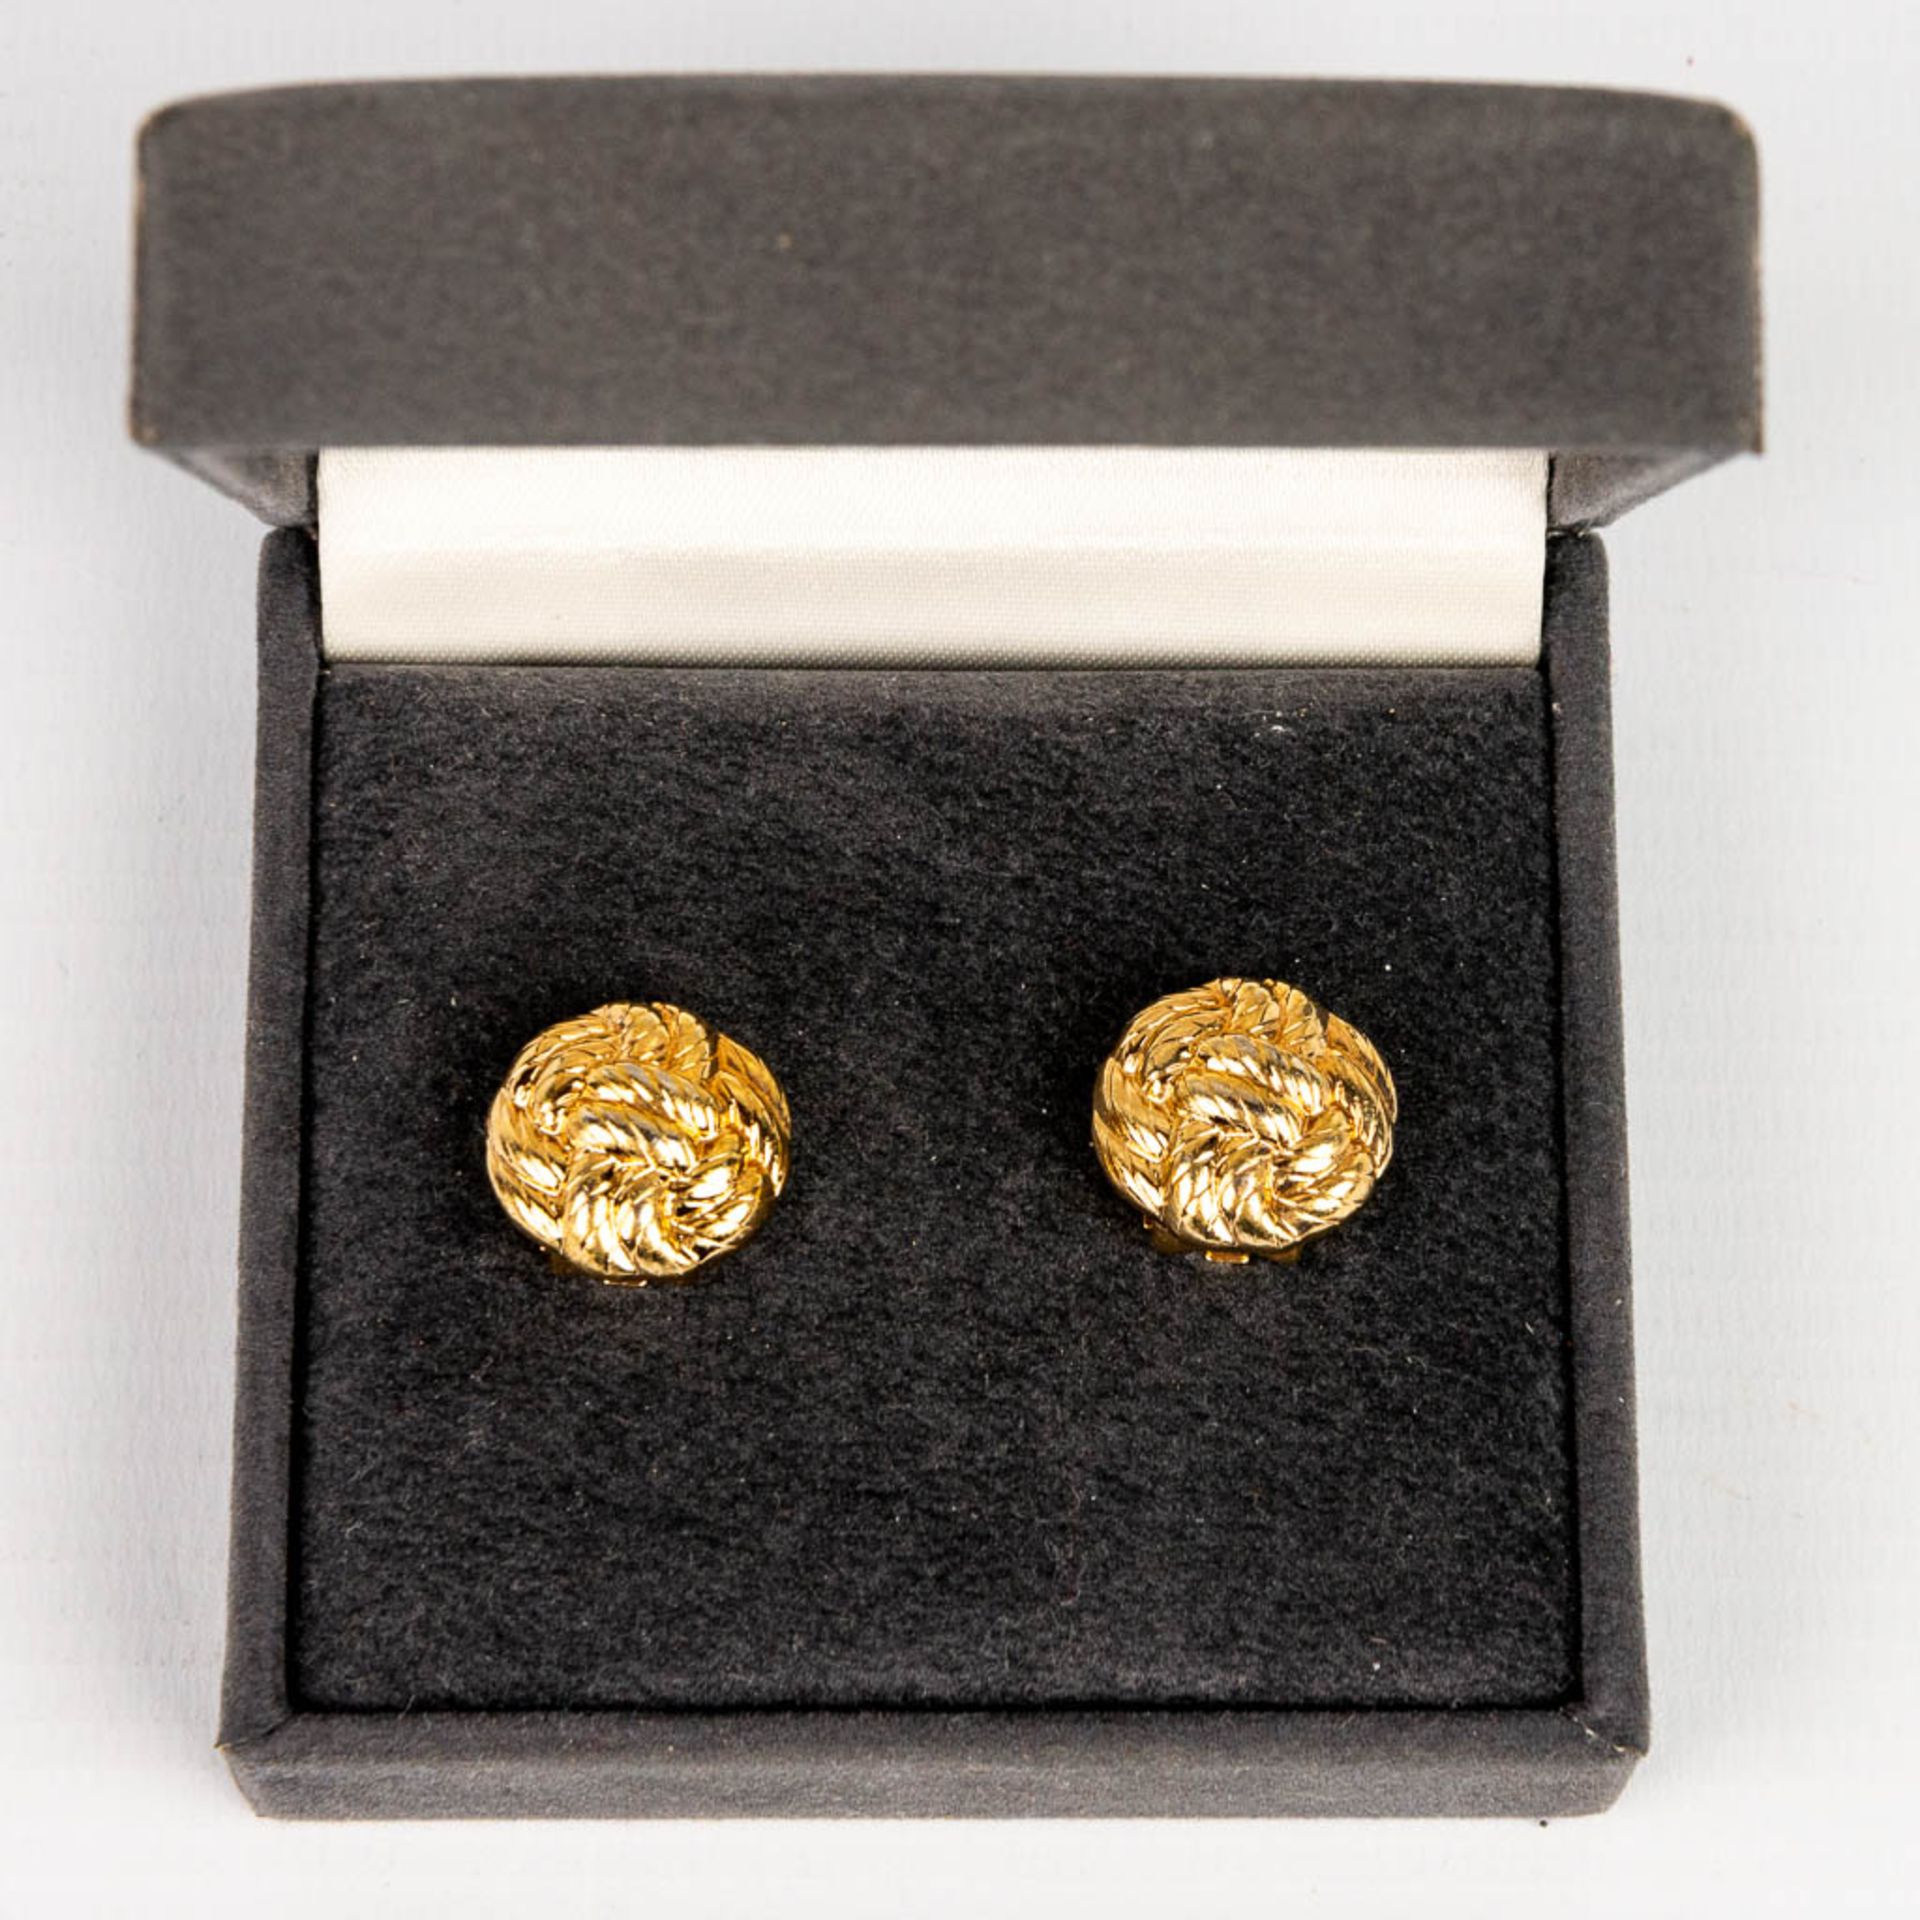 A pair of button covers made by Christian Dior, gold-plated. - Image 5 of 6